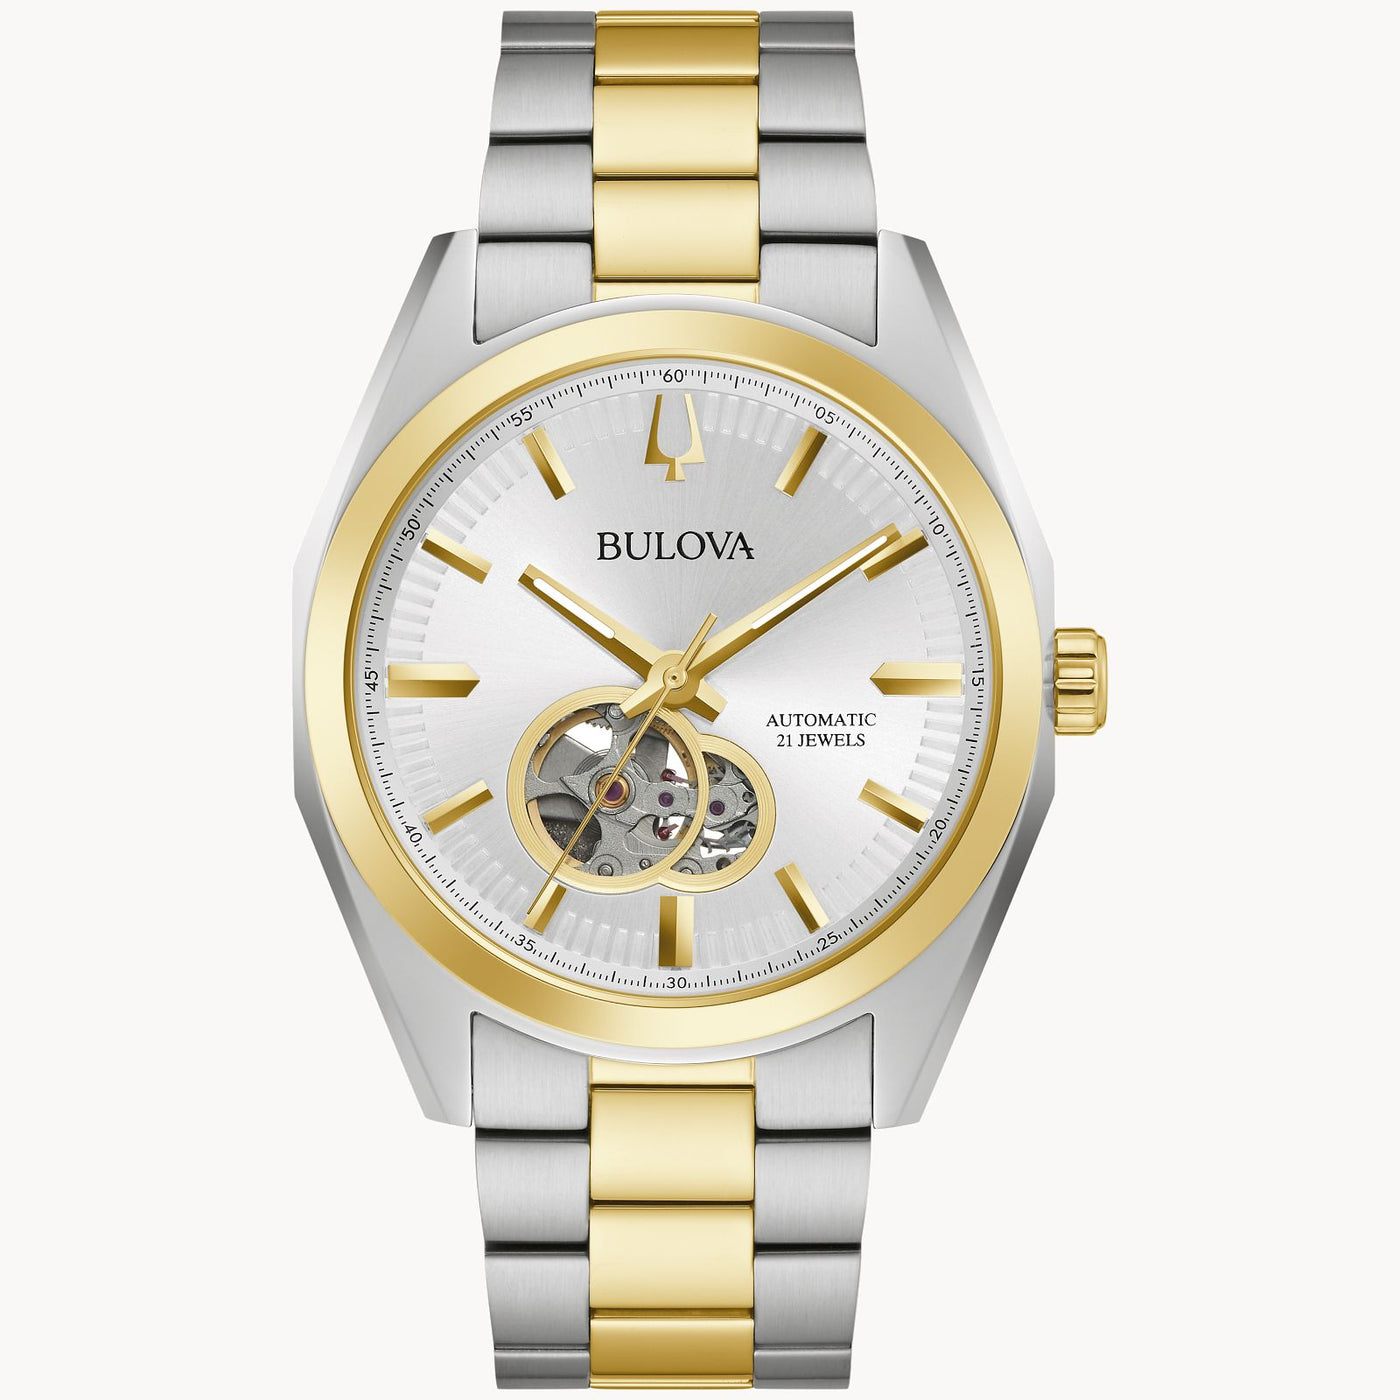 Gents Two-tone Bulova "Surveyor" with a Silver-Tone Dial and Skeleton Chronographs